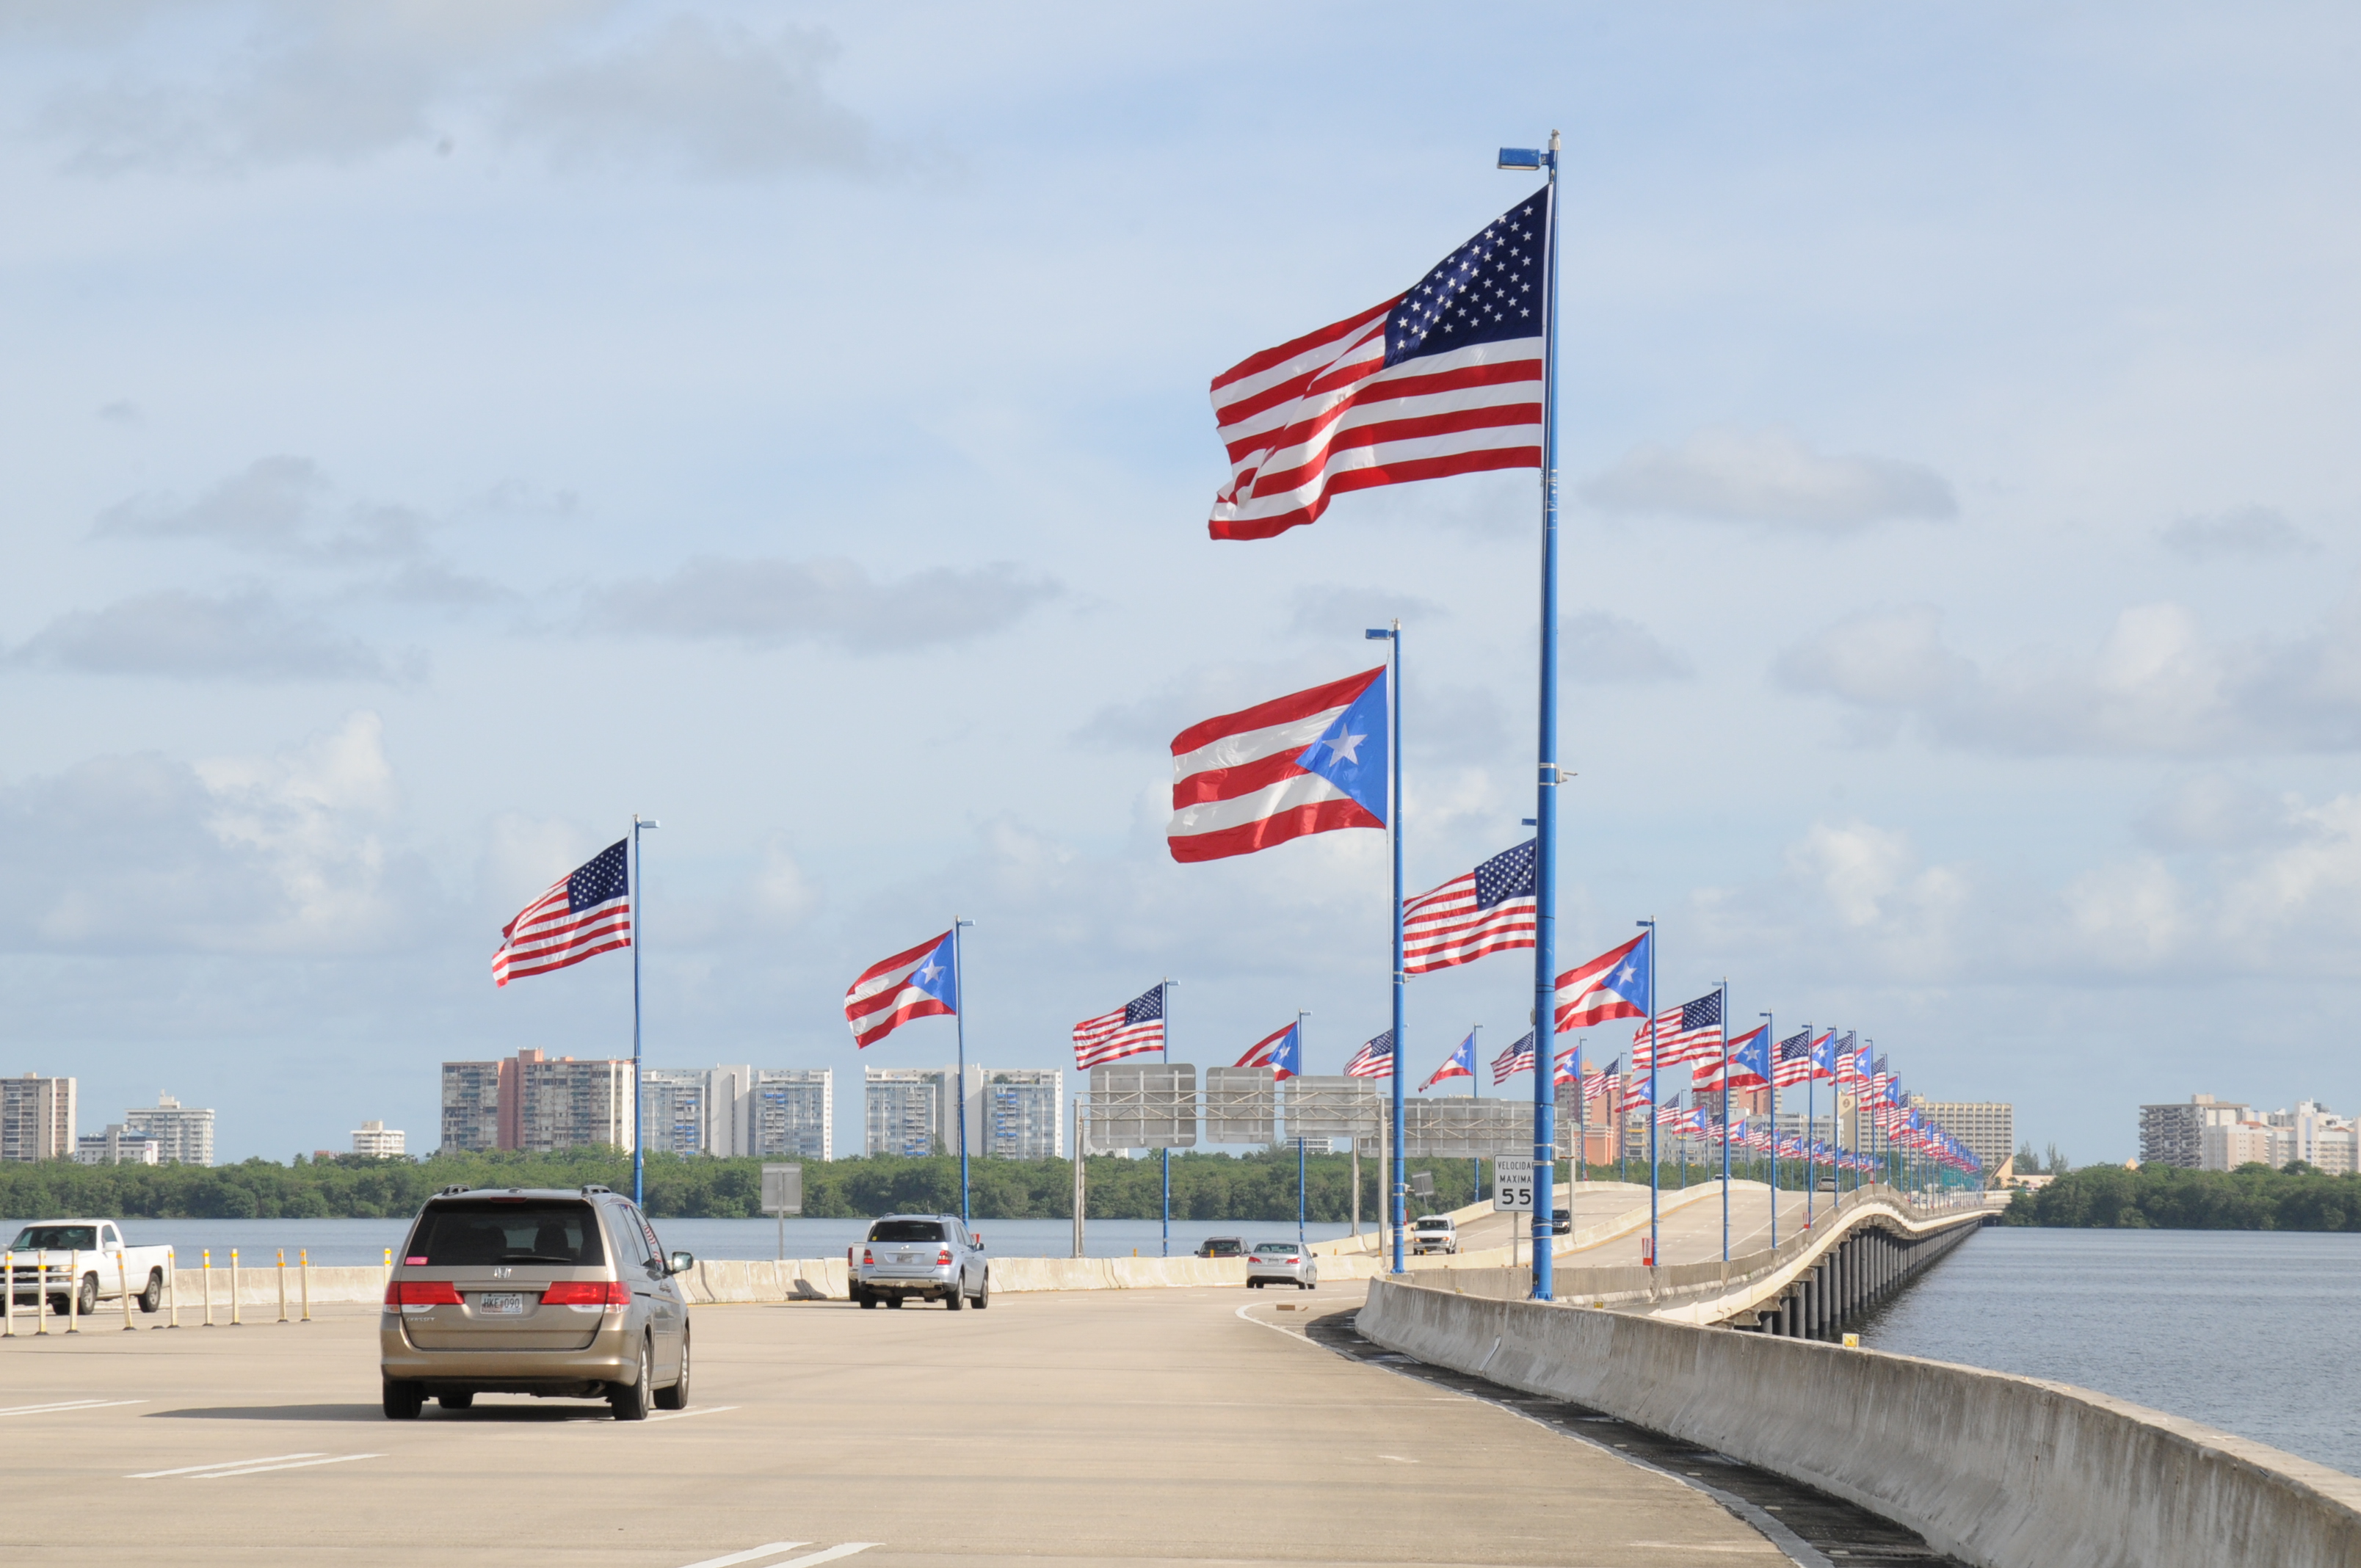 Puerto Rico toll roads - Toll roads - The Group - Abertis